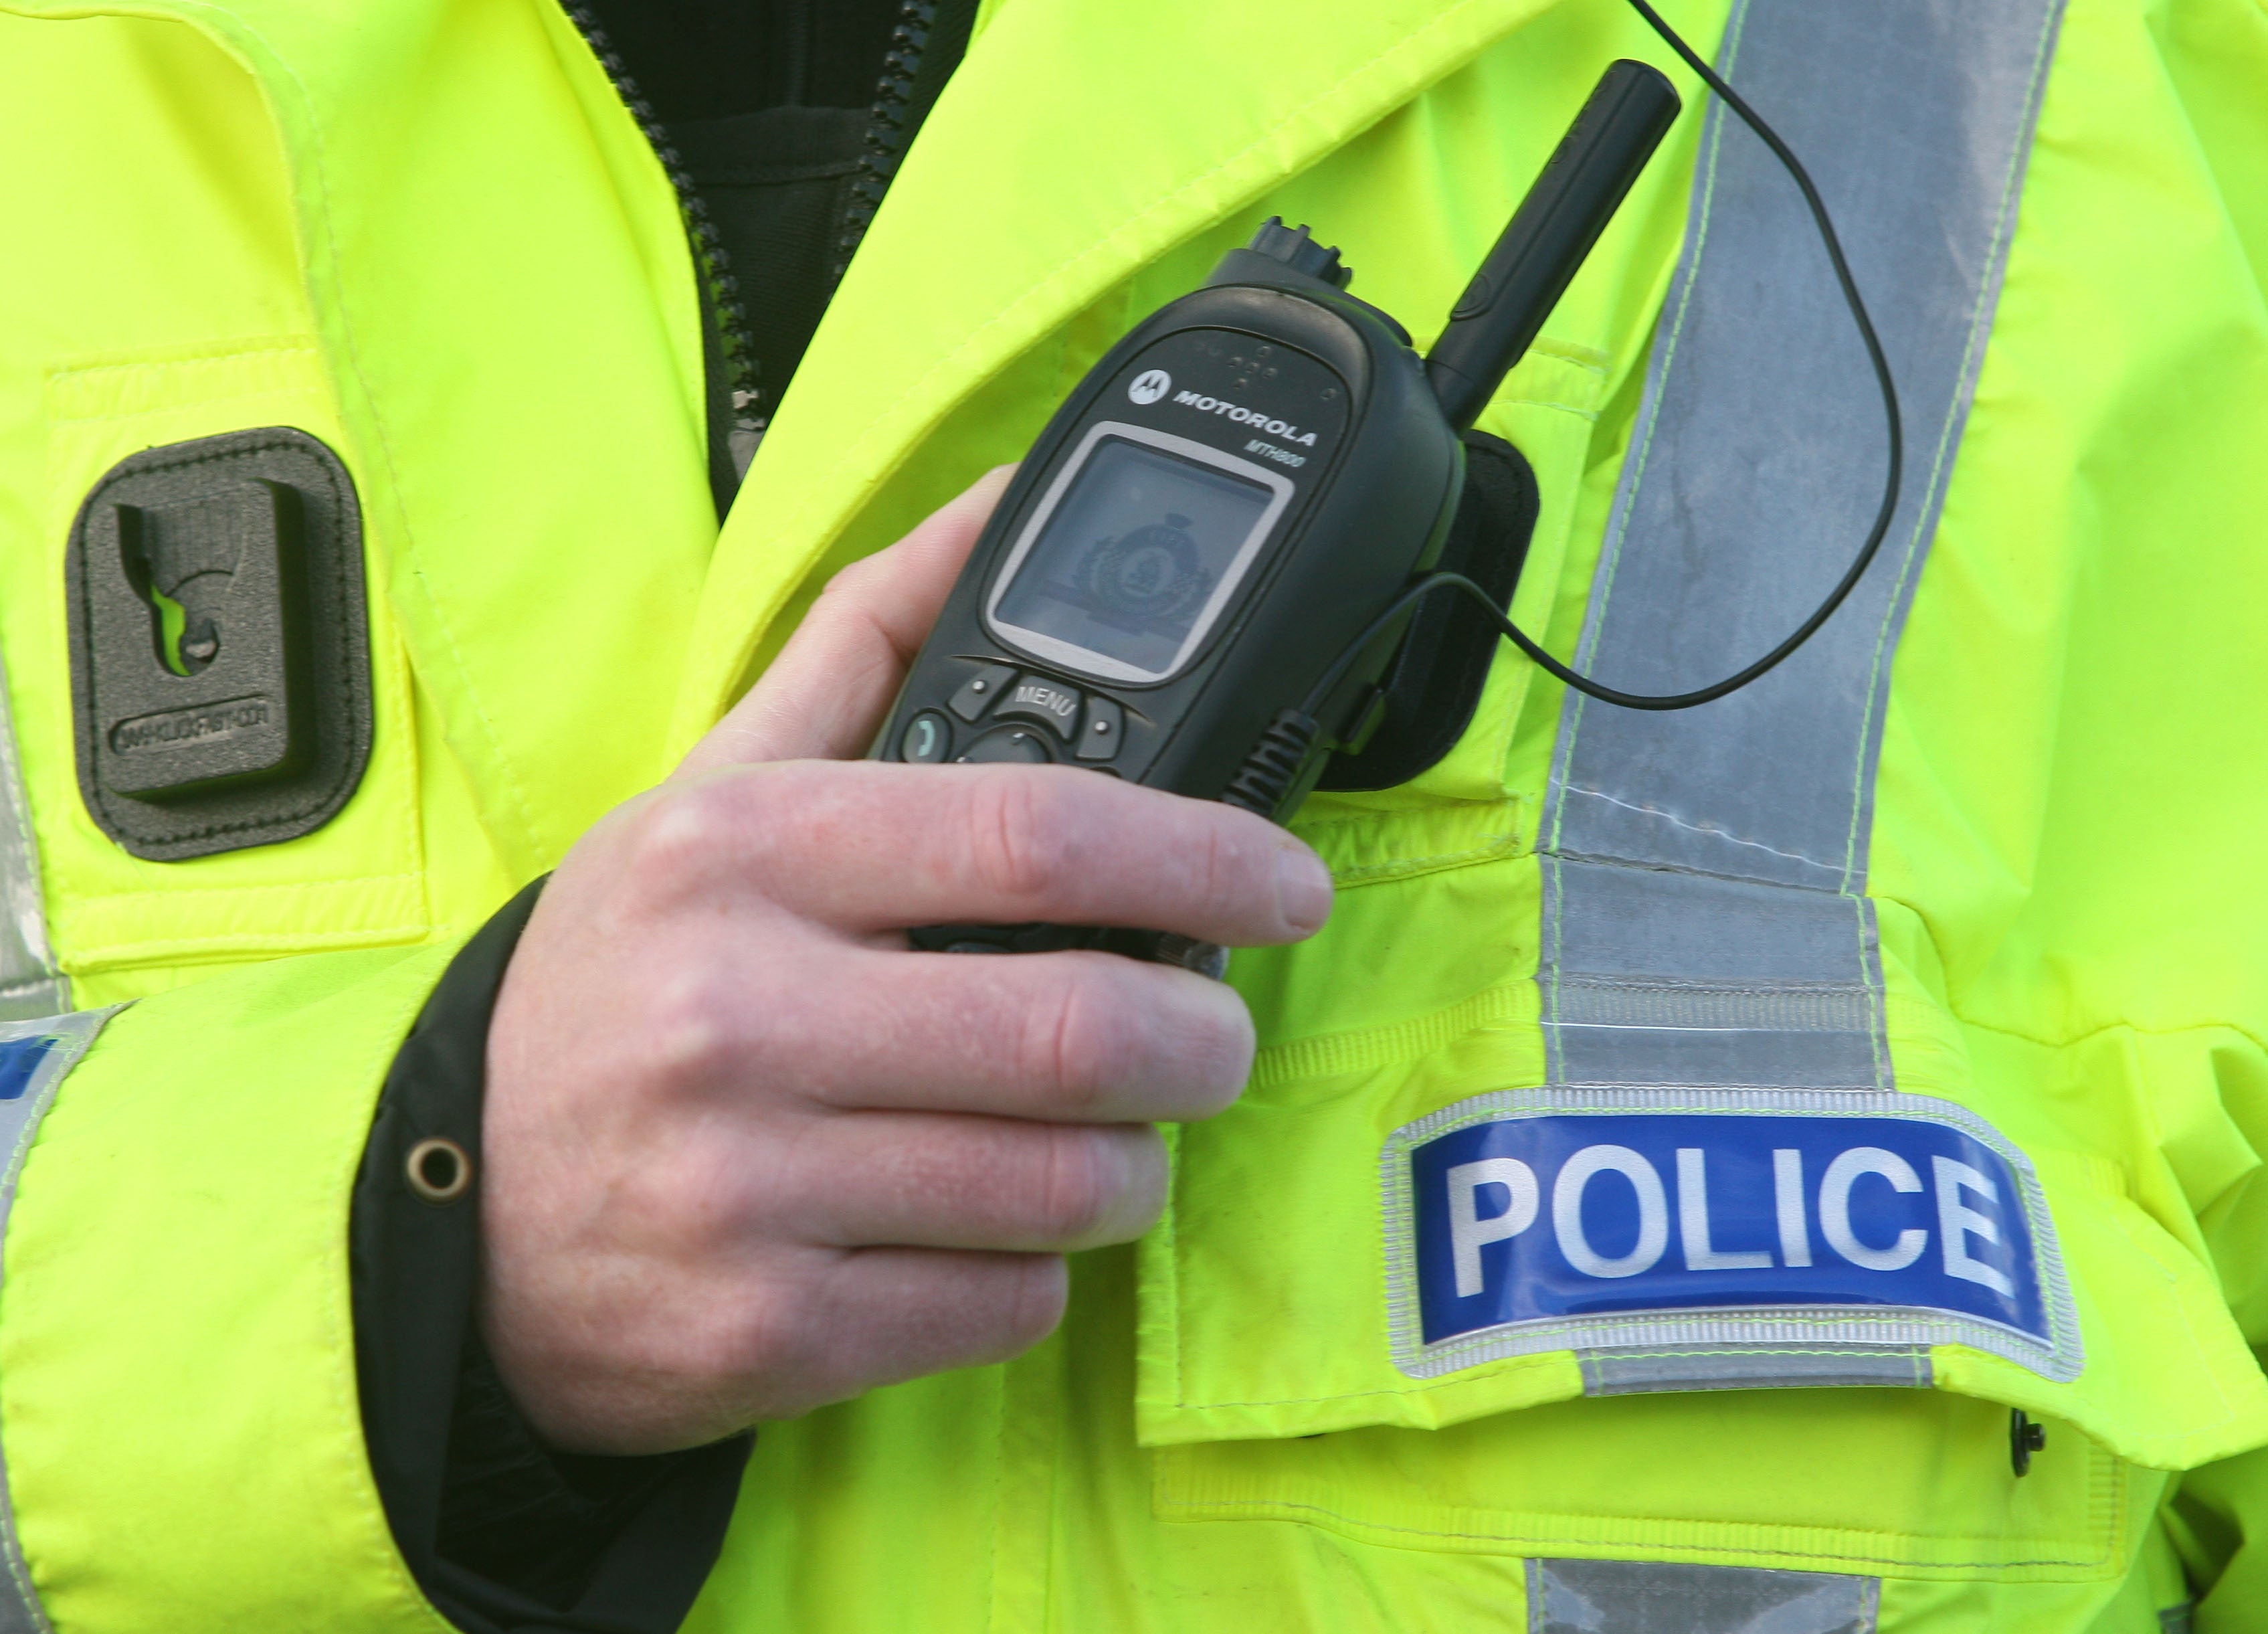 Police are appealing for witnesses or anyone with information to come forward